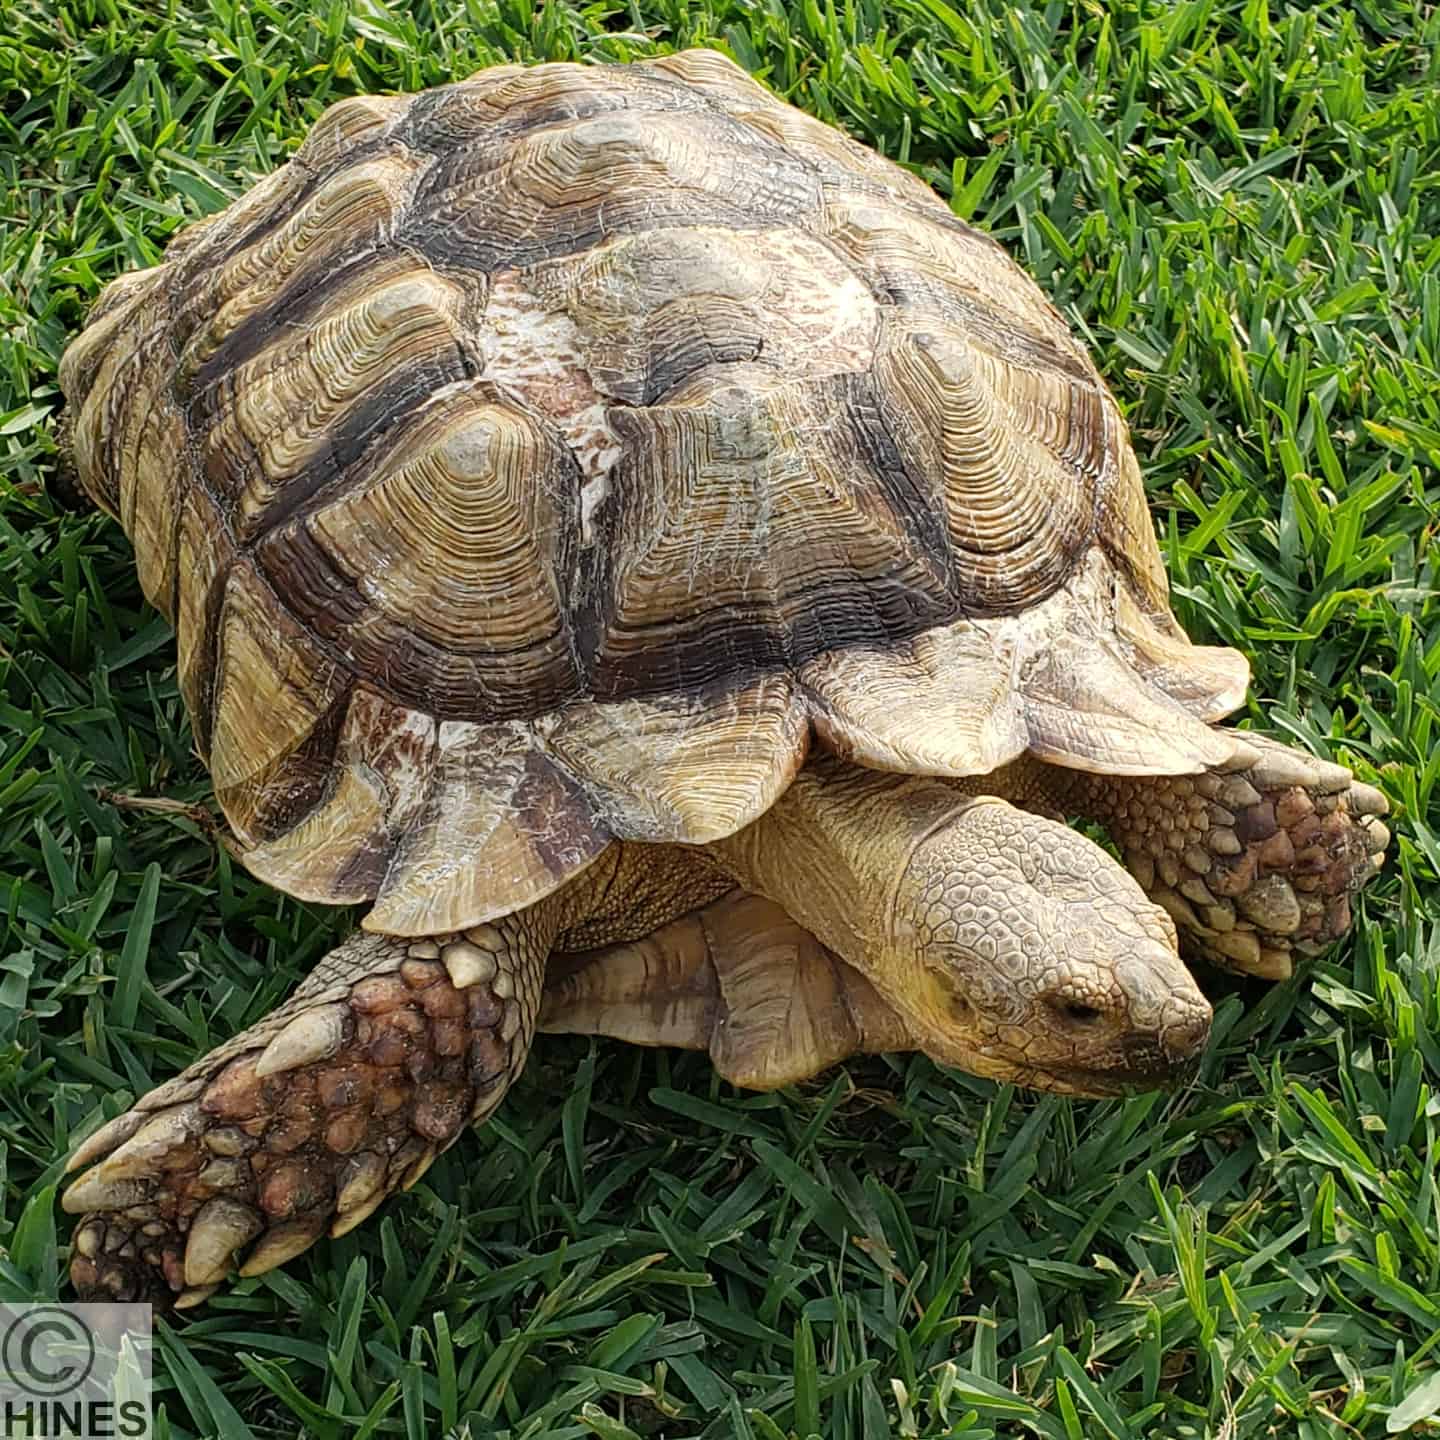 How To Fix A Cracked Turtle – Ron Hines' Vetspace – 2nd Chance